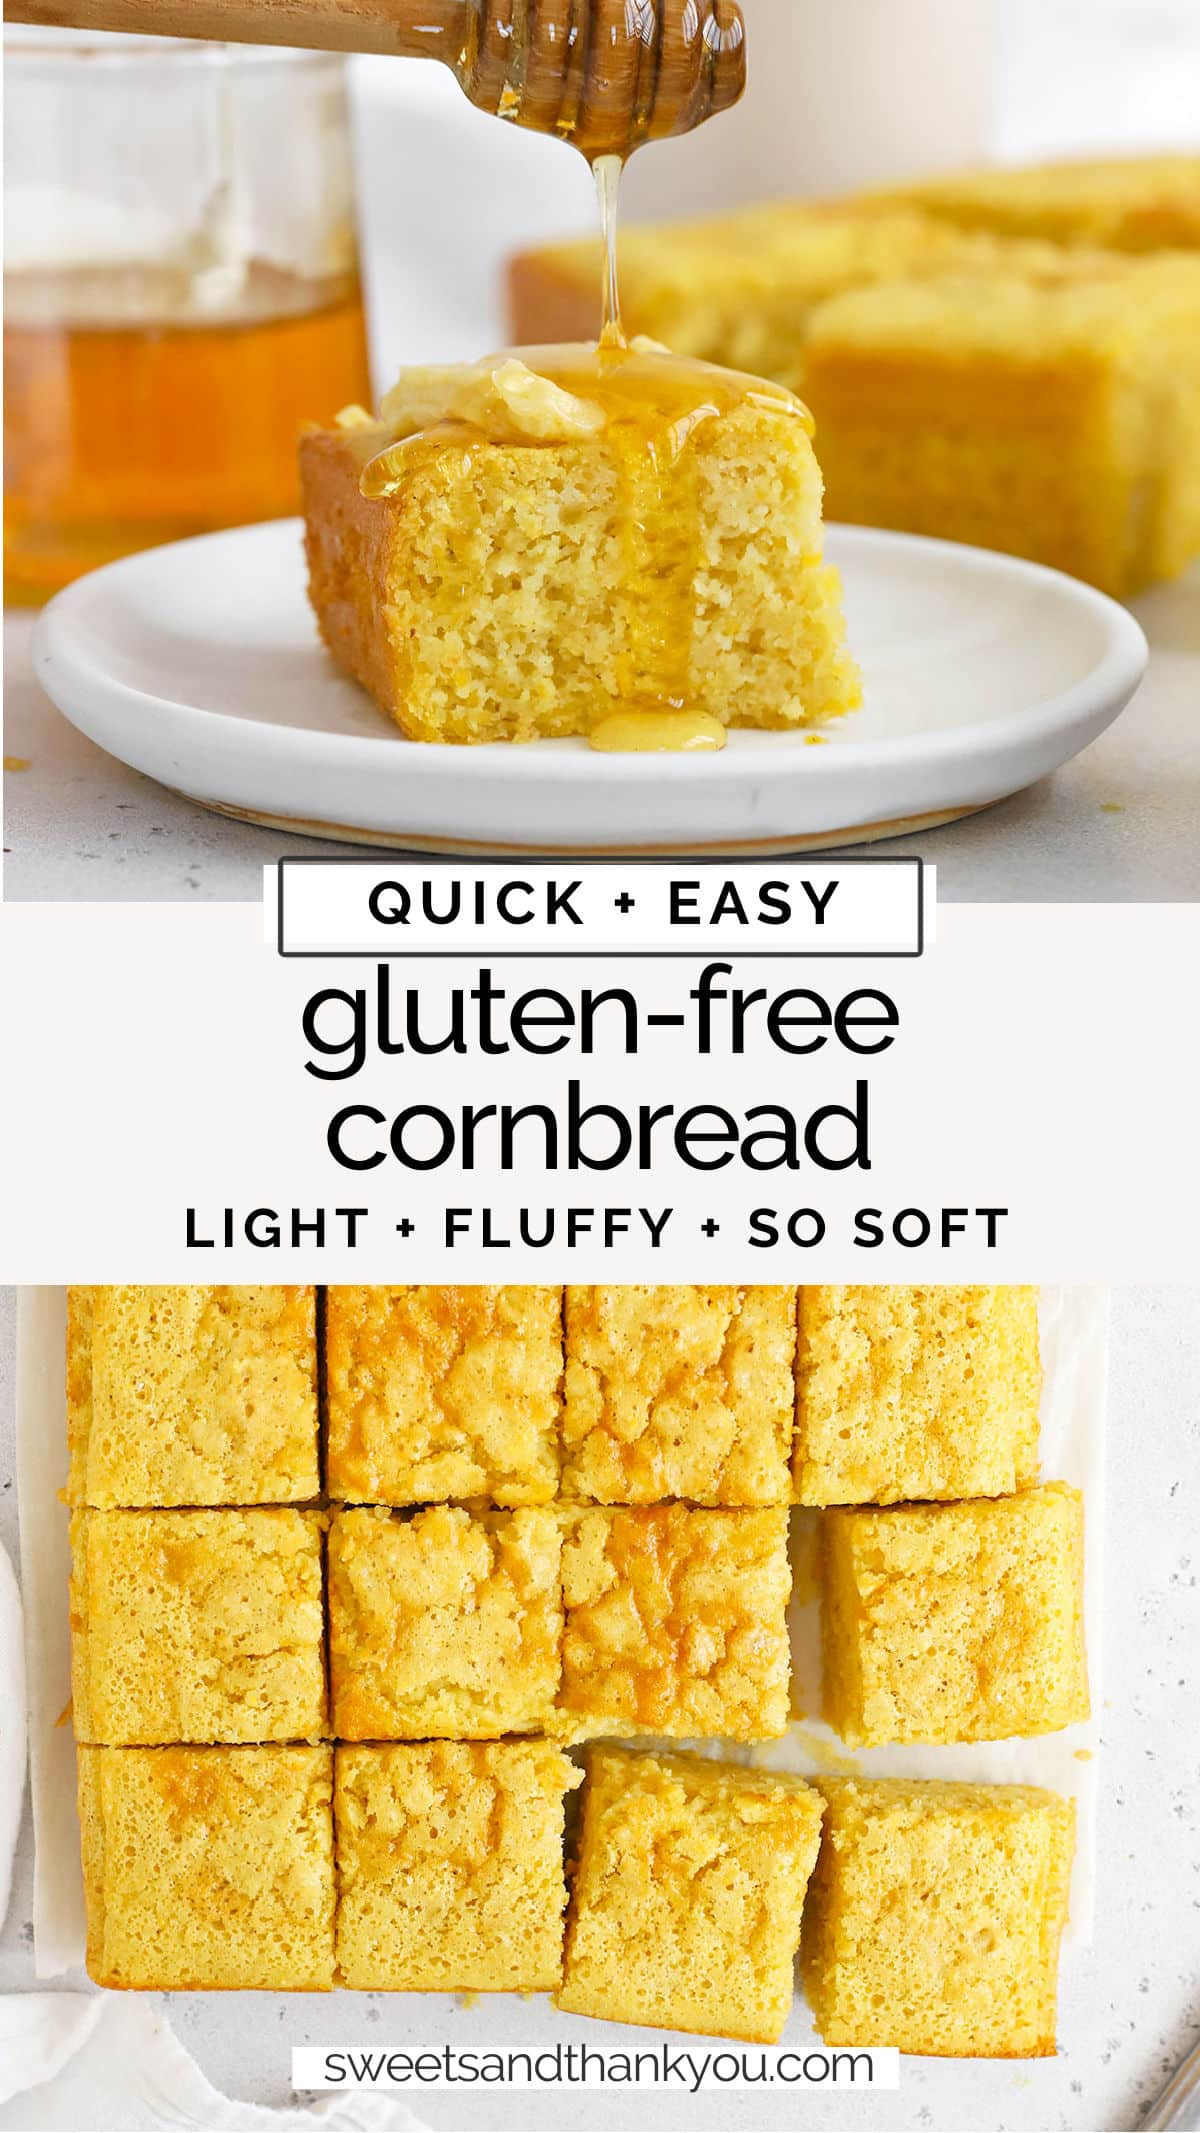 Easy Gluten-Free Cornbread - This is the BEST gluten-free cornbread recipe we've ever tried. Fluffy, moist, perfectly sweet & easy to make! / fluffy gluten-free cornbread / easy gluten-free cornbread recipe / delicious gluten-free cornbread recipe / how to make gluten-free cornbread, step by step / is cornbread gluten-free / easy gluten-free corn bread recipe / moist gluten-free cornbread / sweet gluten-free cornbread / gluten-free cornbread from scratch // gluten-free cornbread without a mix